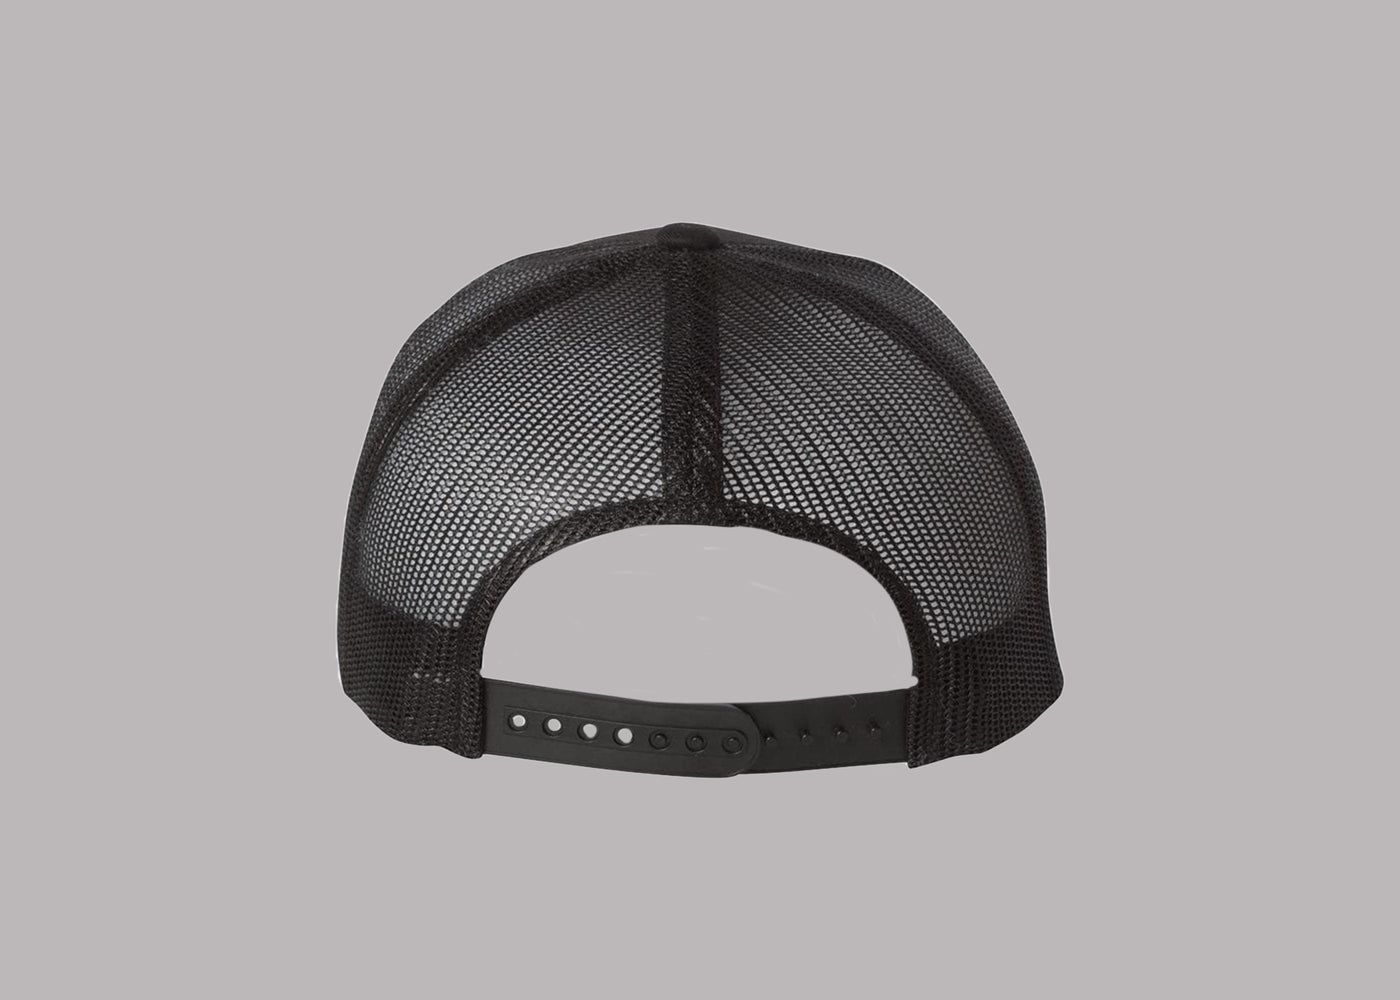 Embroidered Shadow Charcoal Snapback